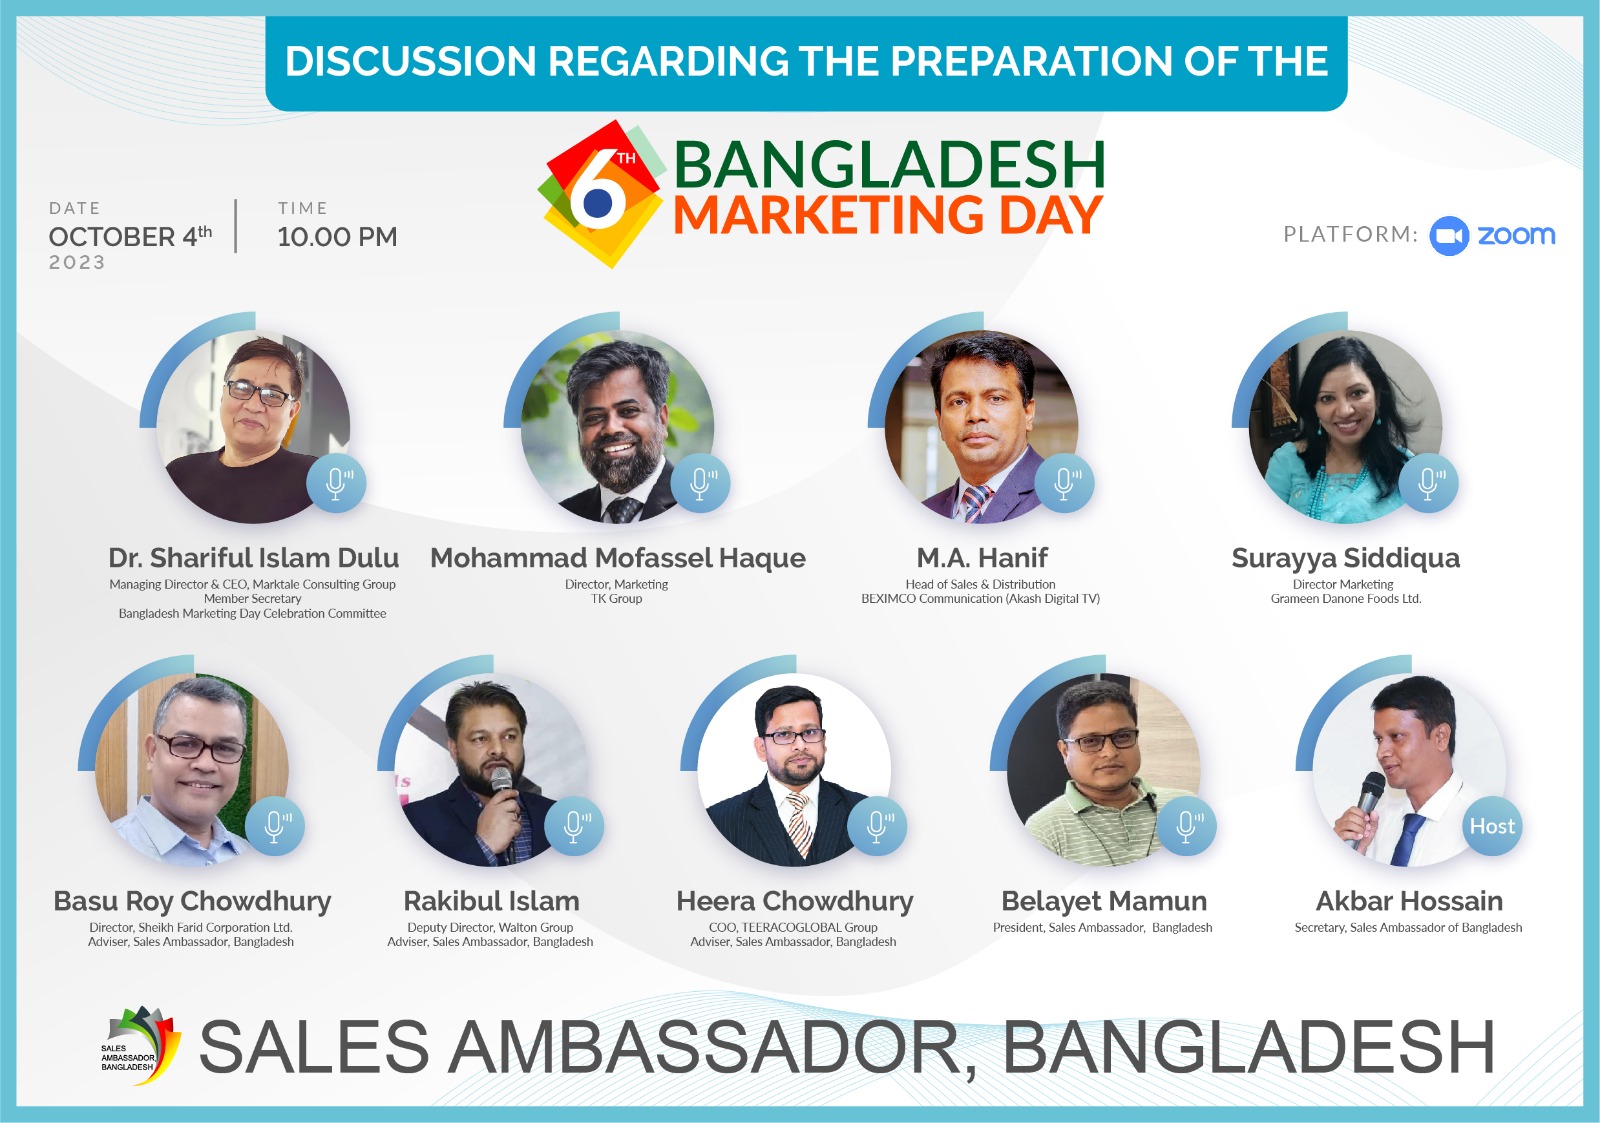 Discussion Regarding the Preparation of the 6th BANGLADESH marketers Day